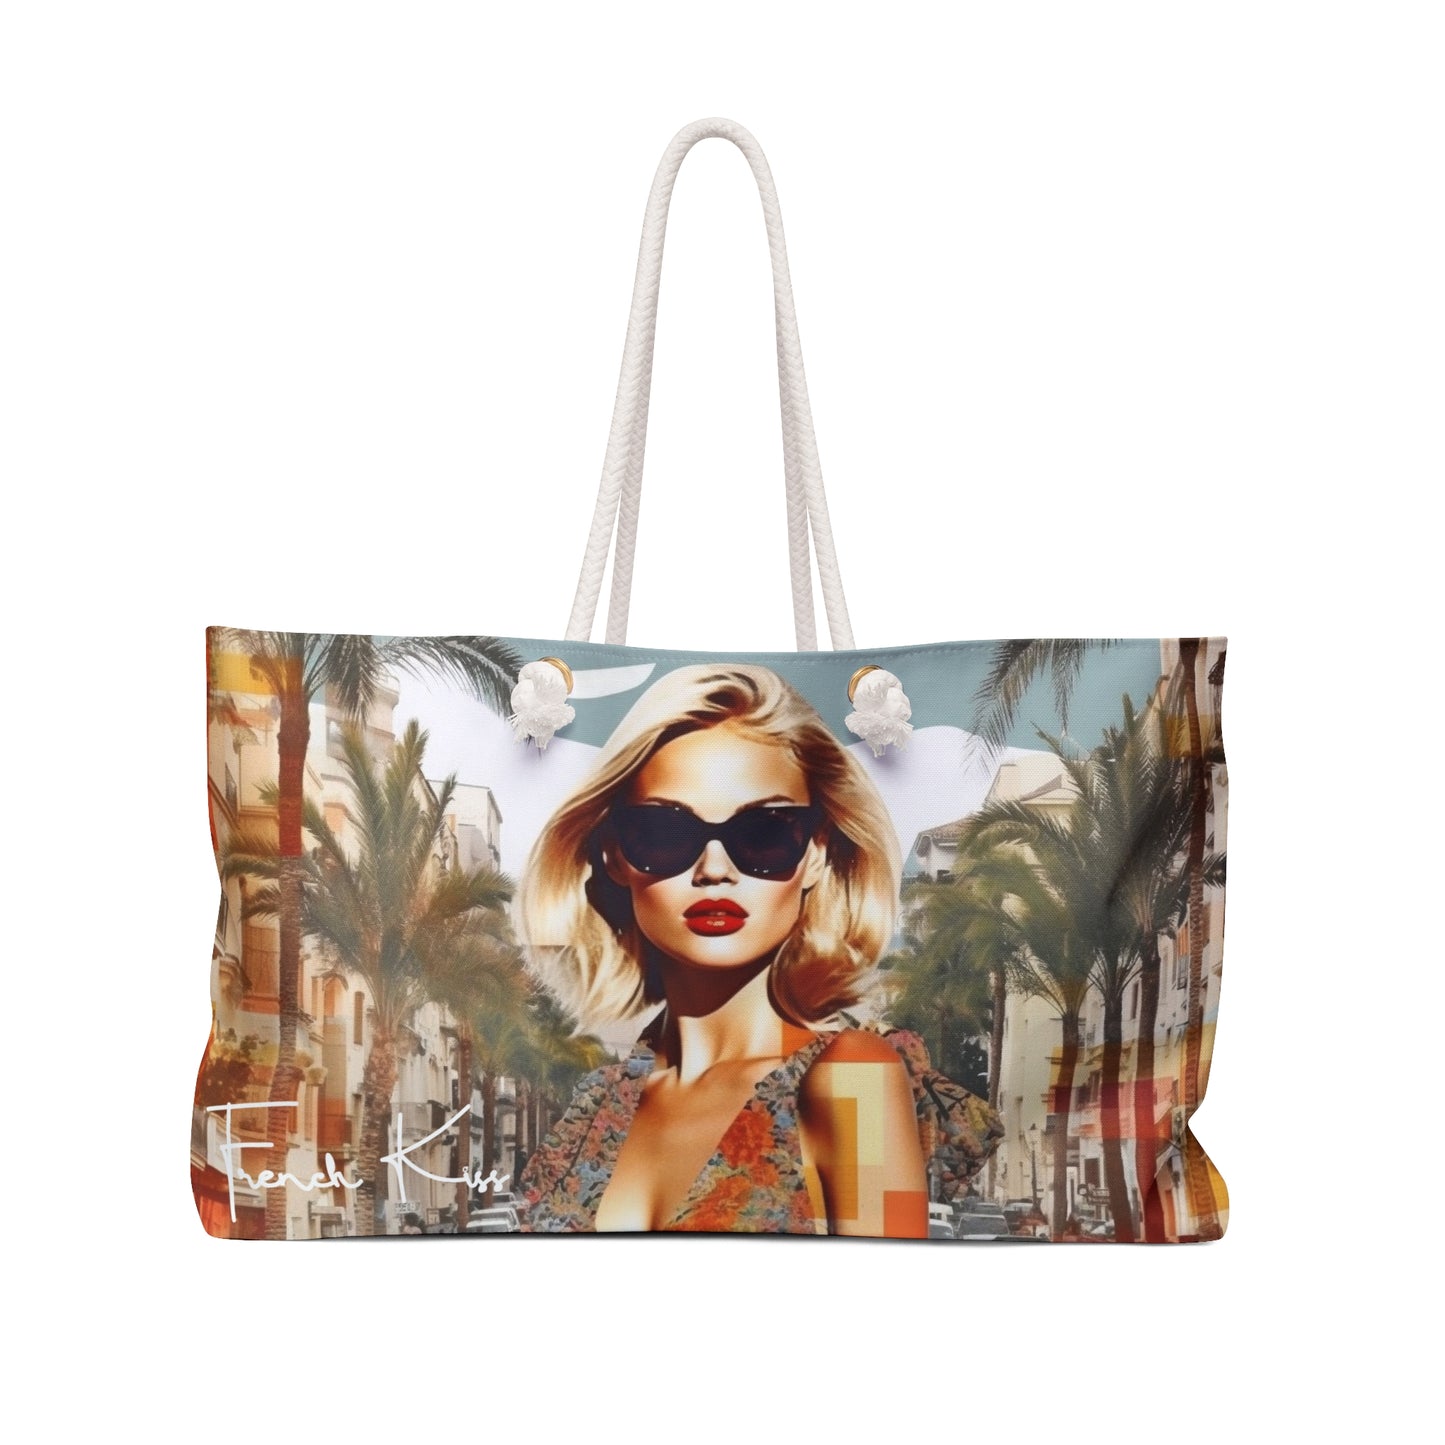 J'ADORE Sassy Sexy Chic Weekender Accessory Bag French Kiss Pop Art, Classy, Couture, Travel, Fashion, Beauty gift item